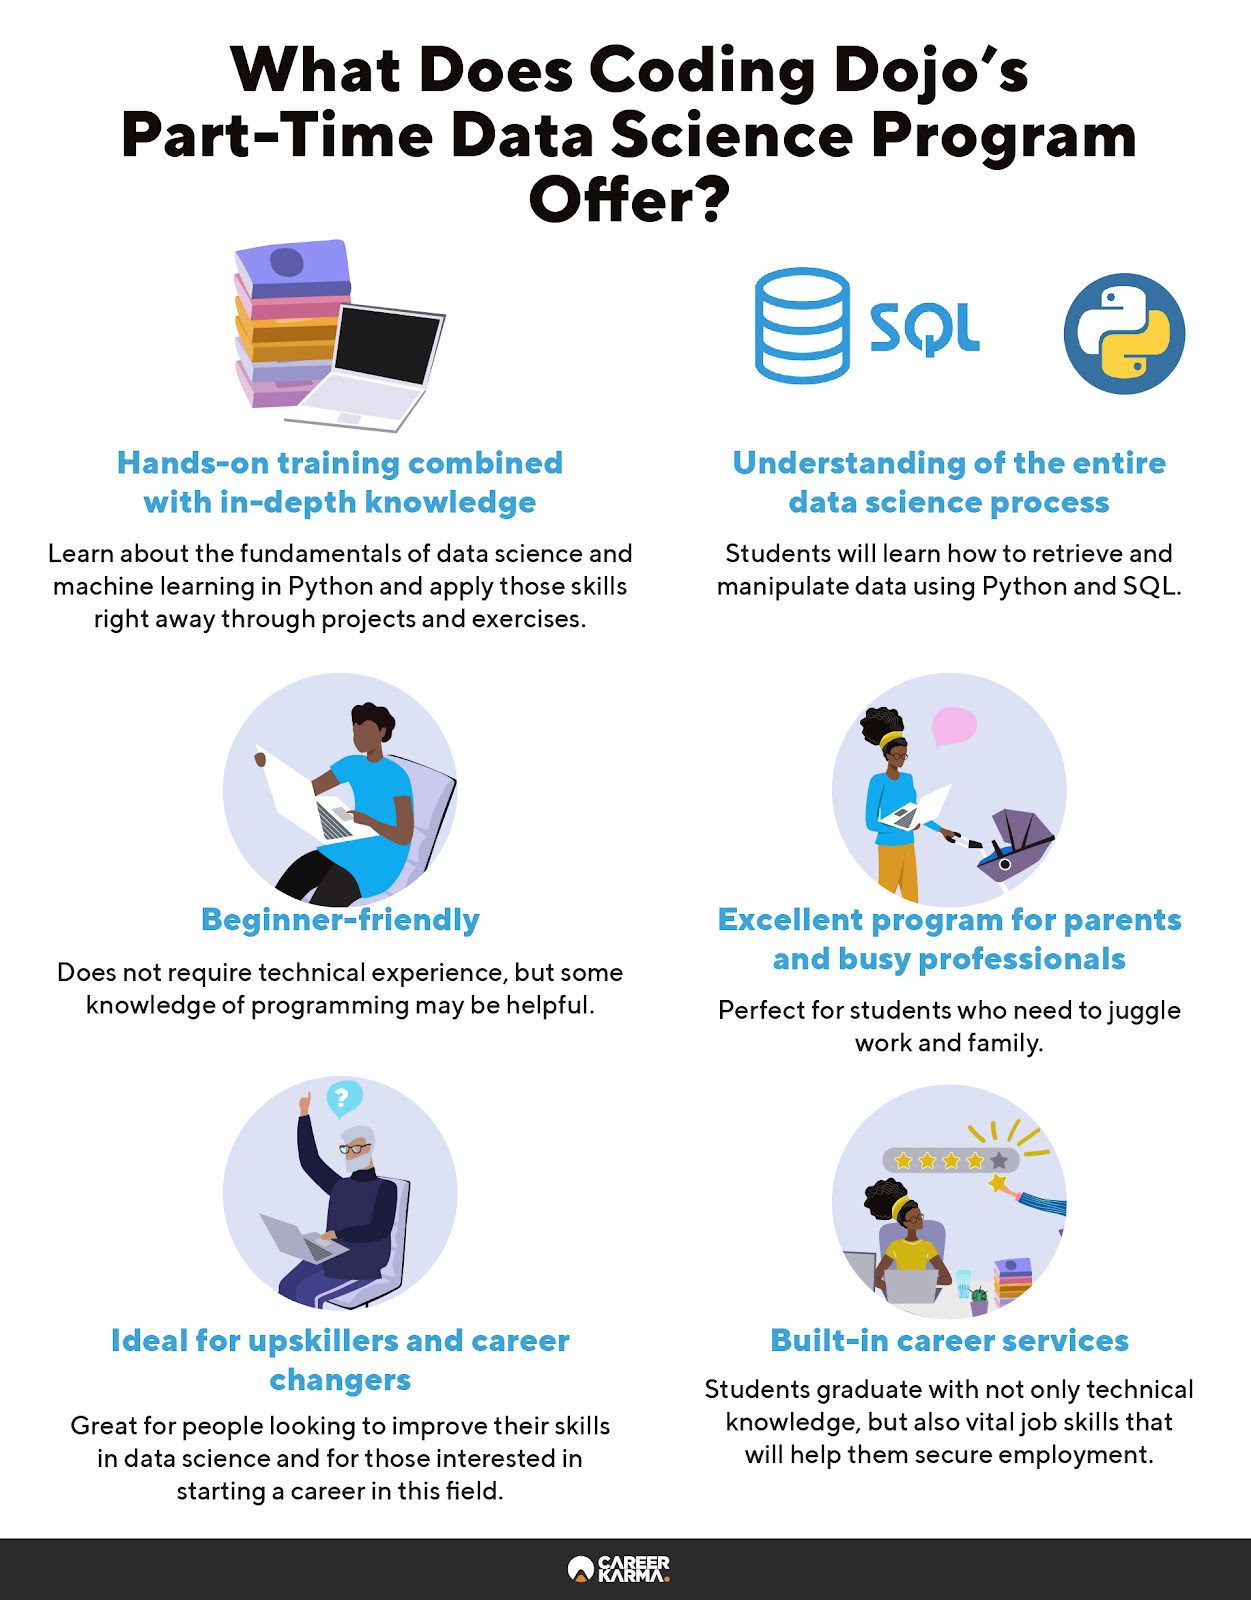 An infographic highlighting the key features of Coding Dojo’s part-time Data Science program